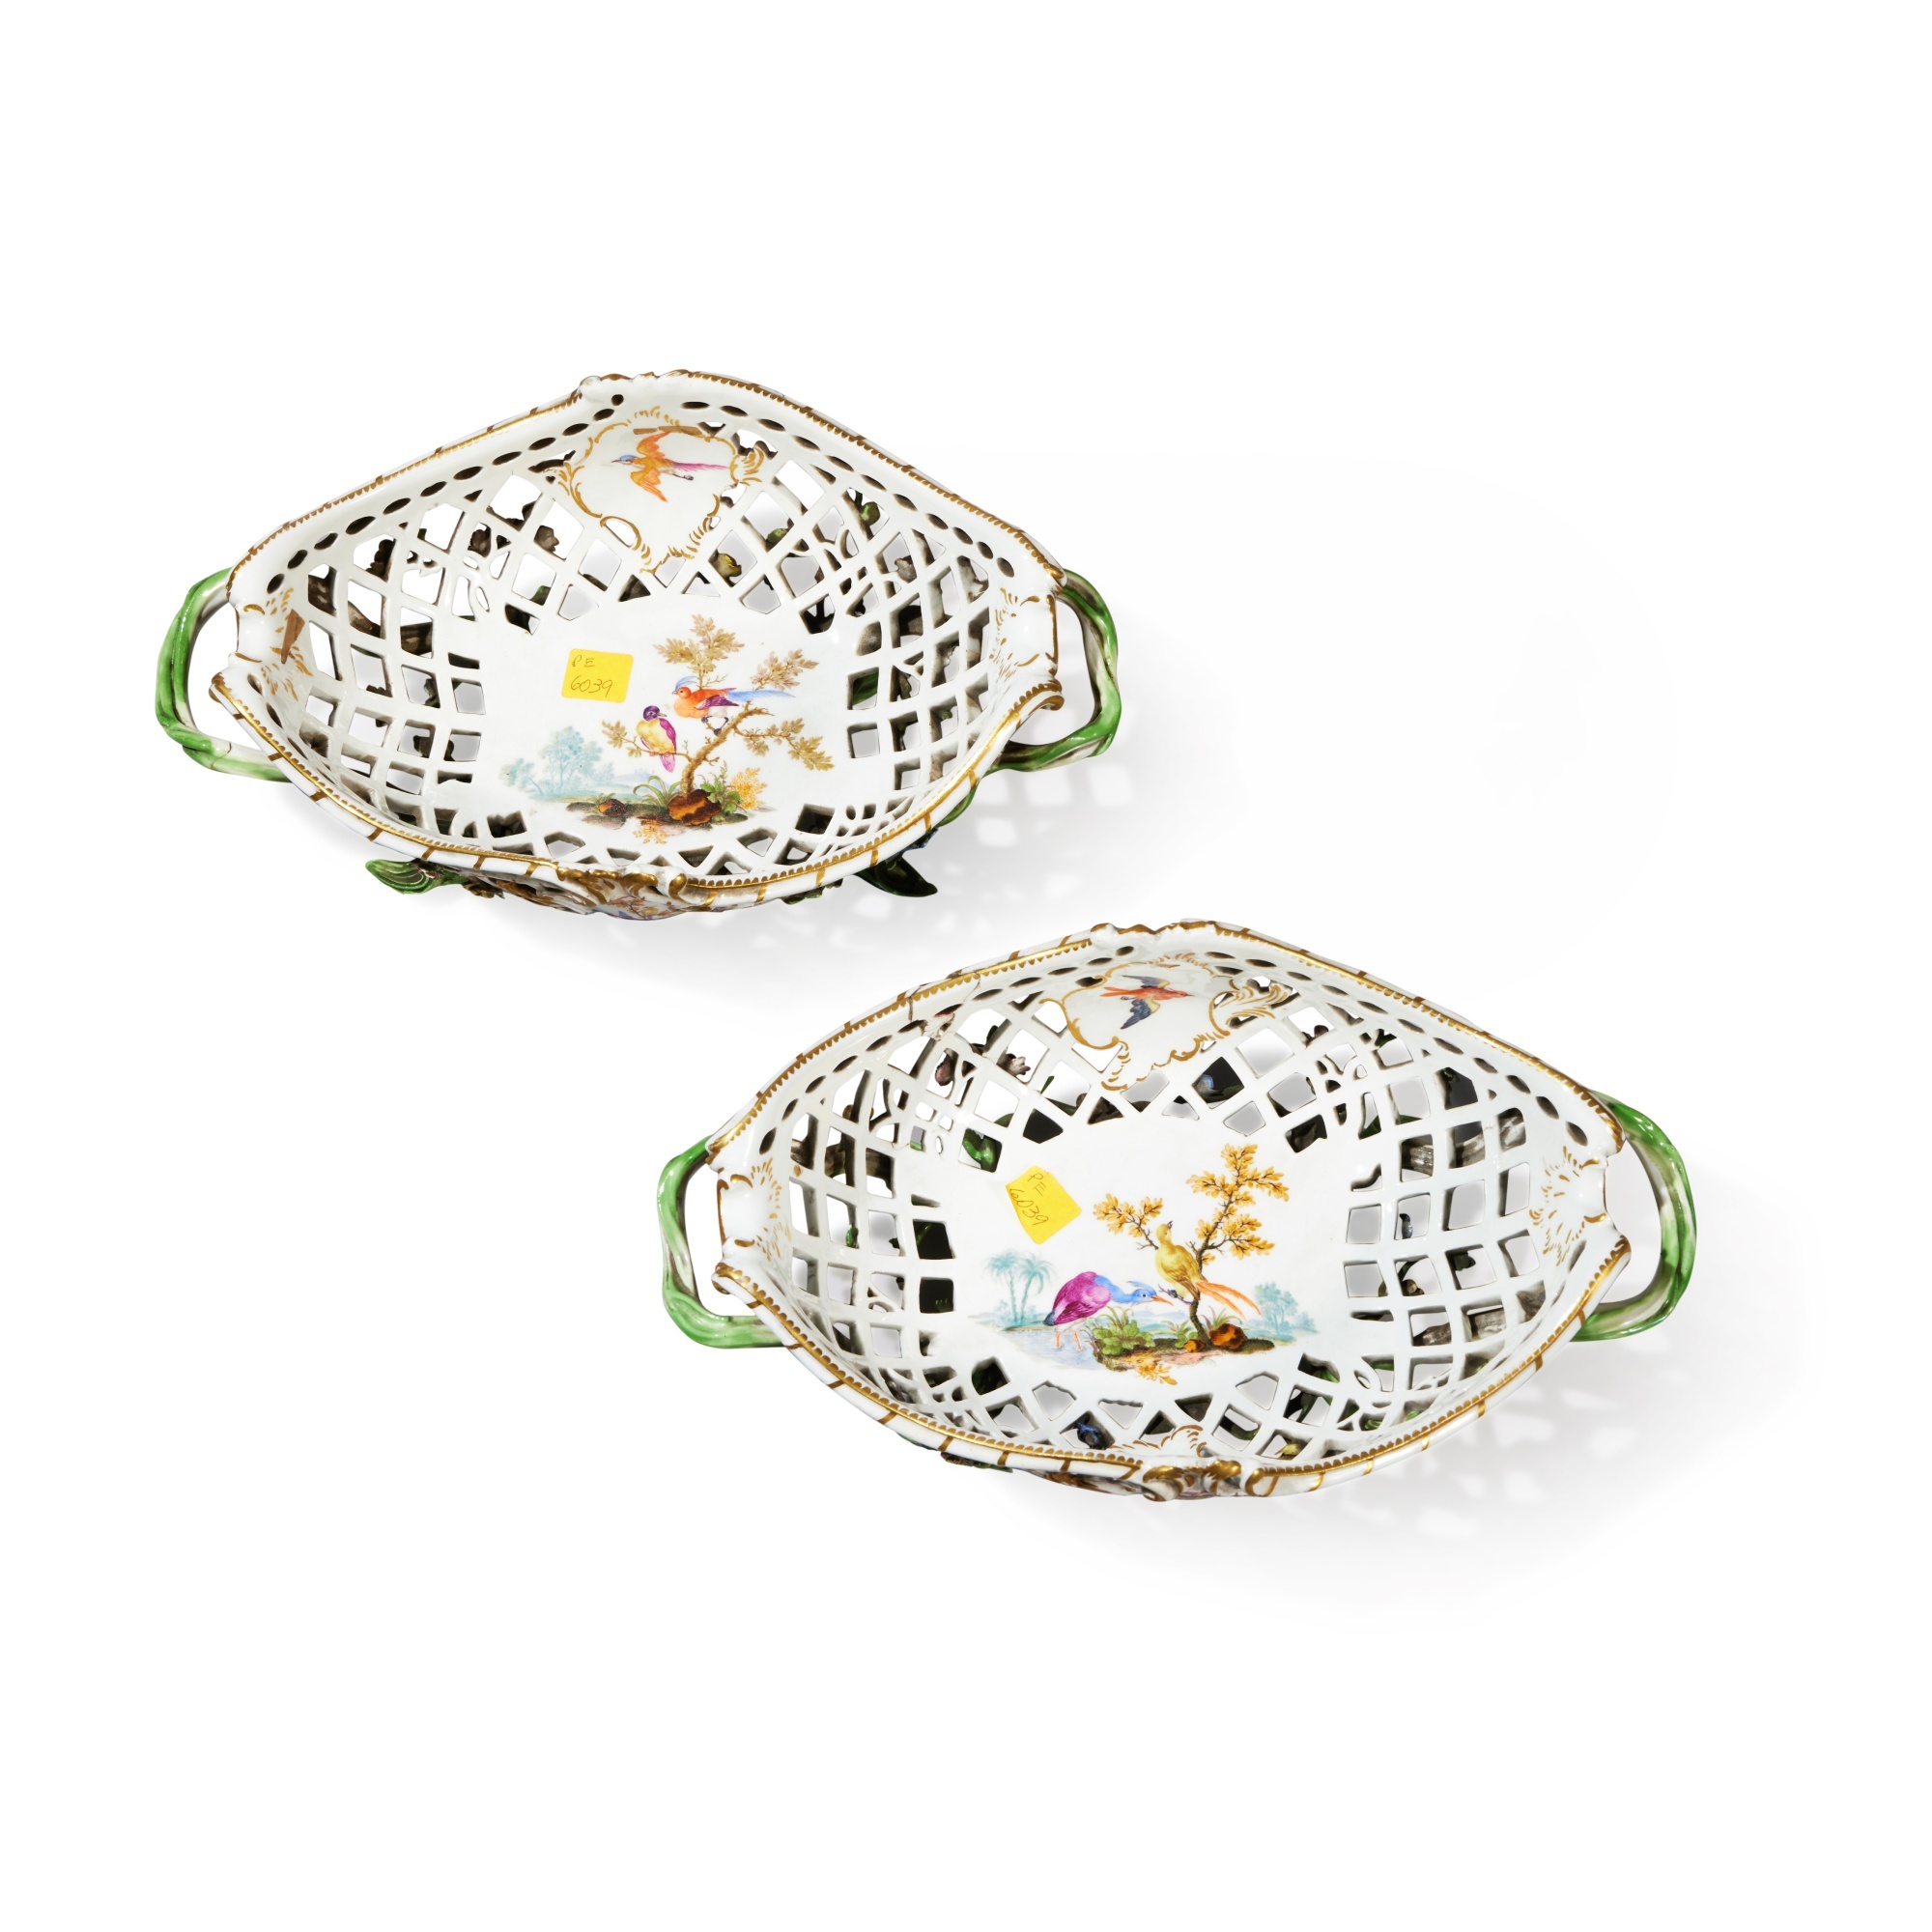 A Pair of Meissen Reticulated Footed Baskets, Circa 1770 - Image 4 of 4